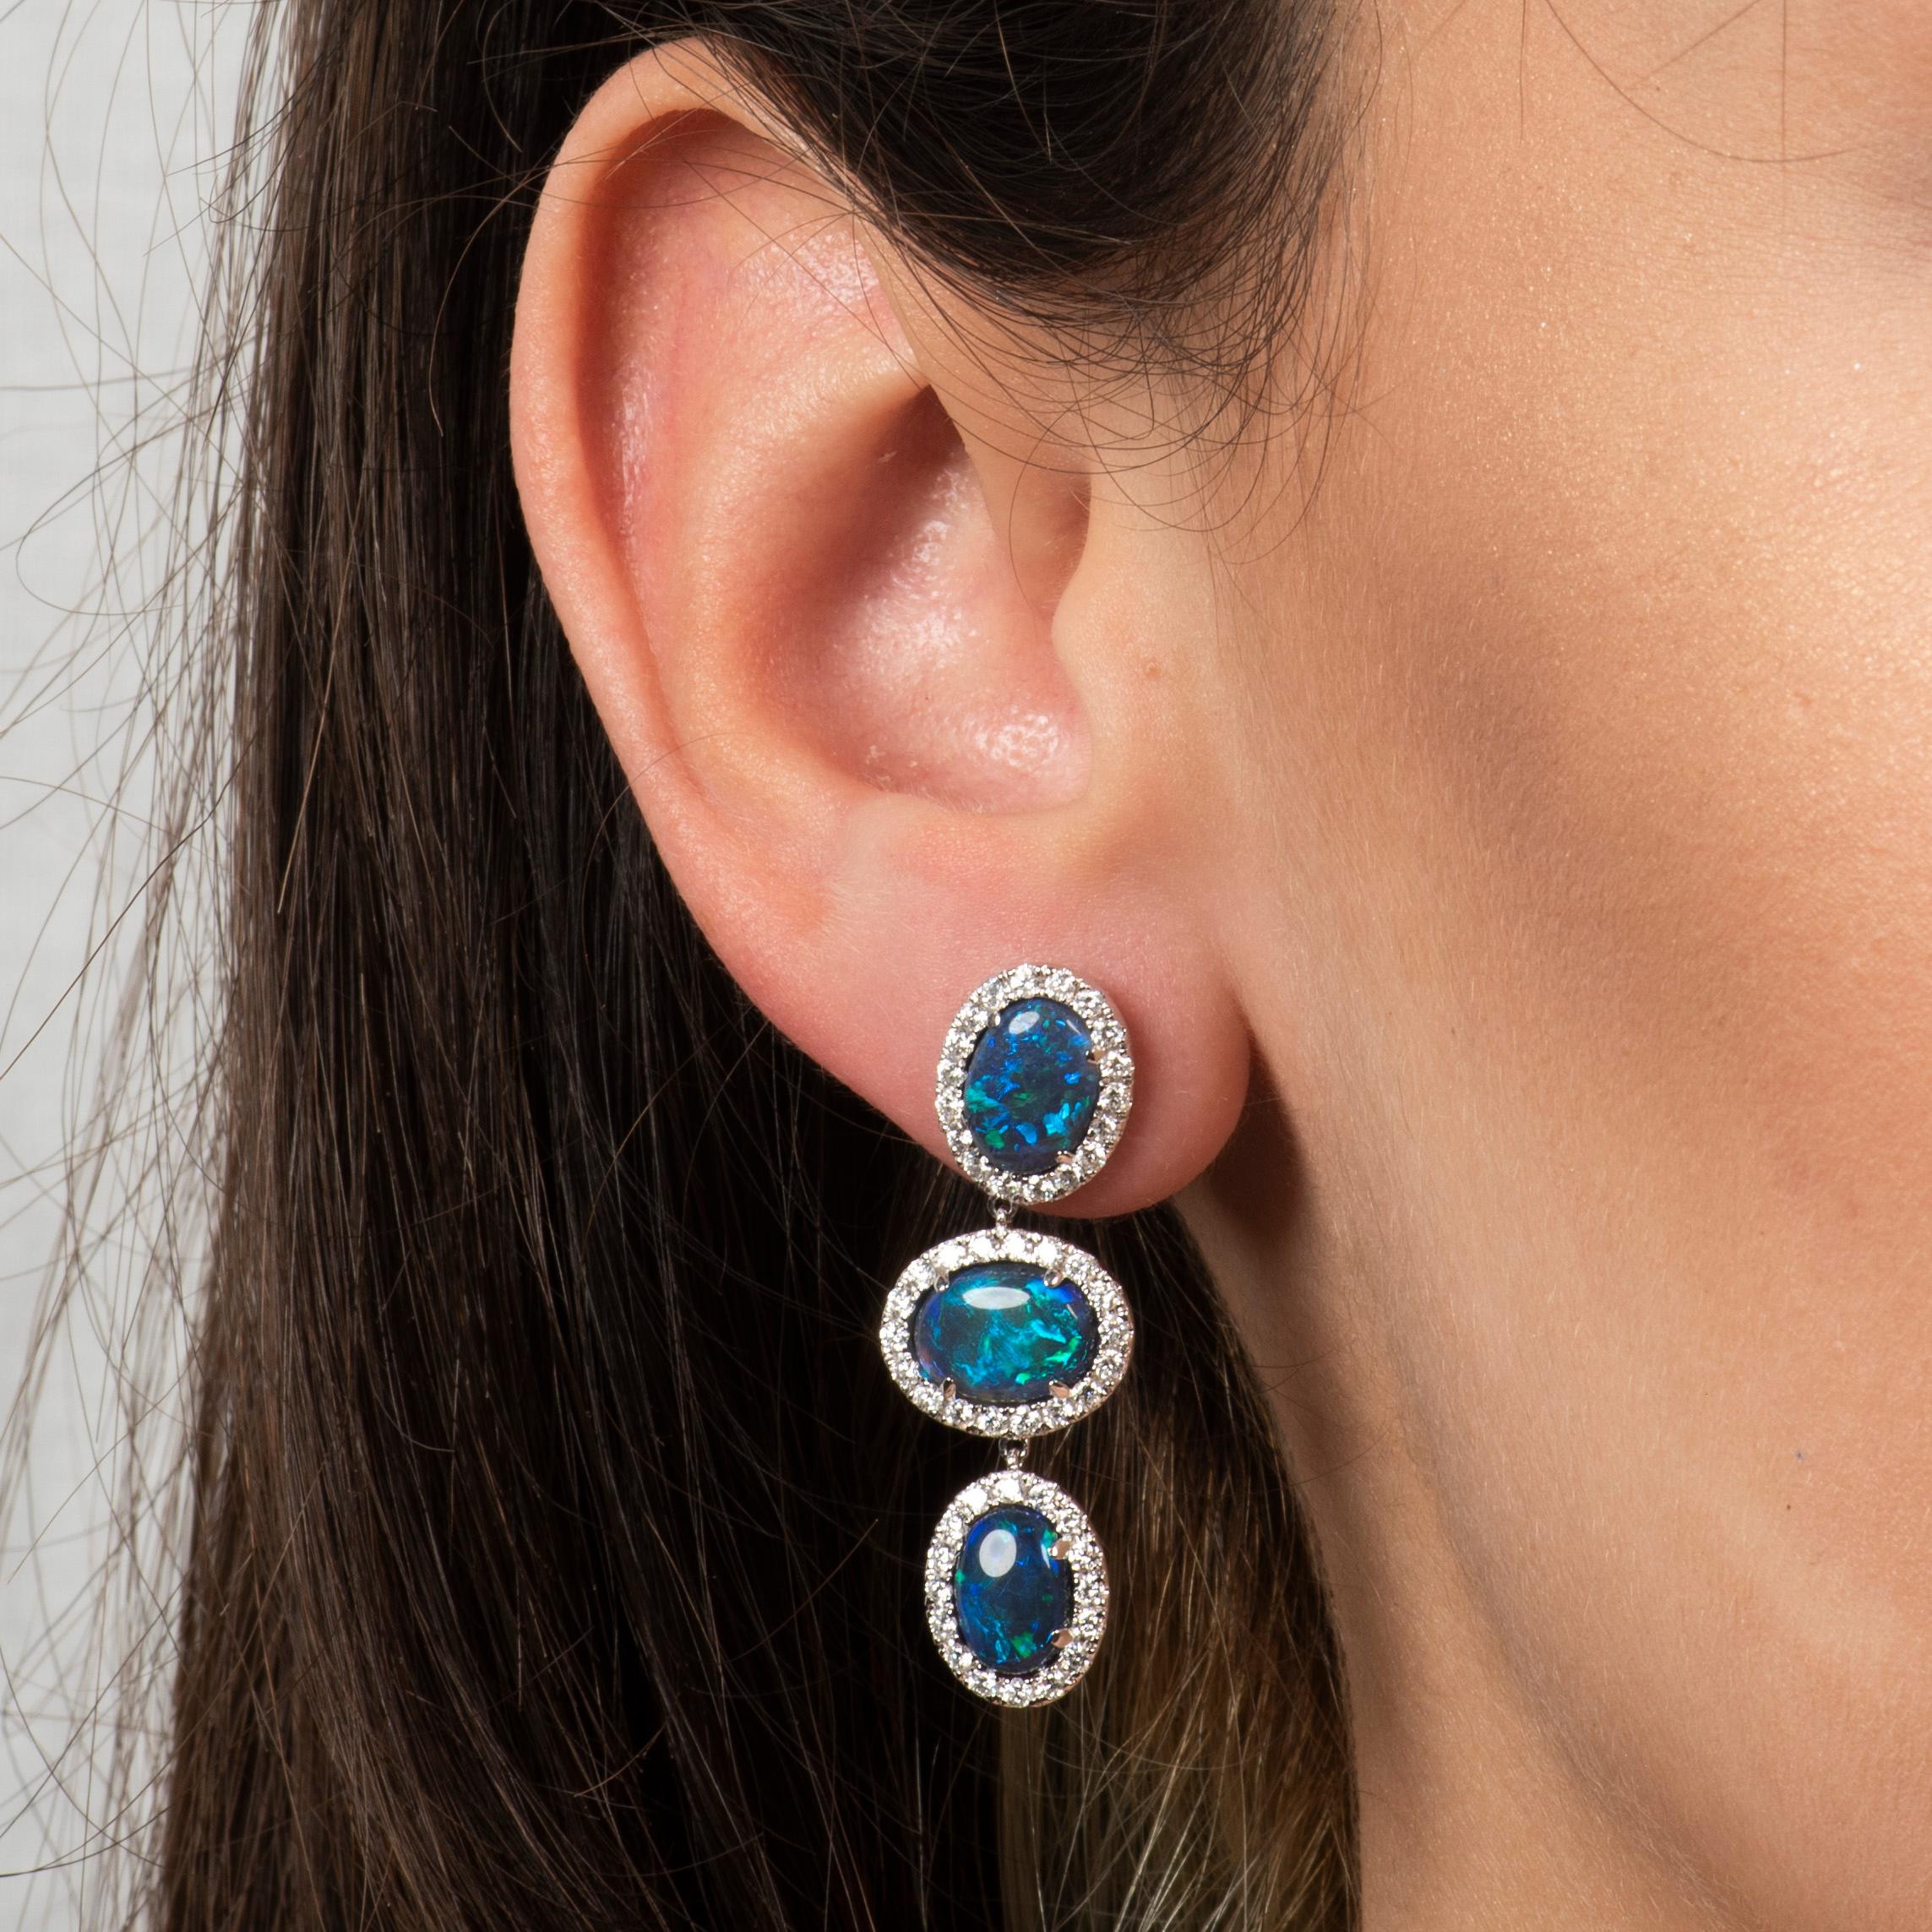 These drop earrings feature six Lightning Ridge Australian opals at a total weight of 6.87ct, including halos of pave round cut diamonds at a total weight of 1.57ct. They are set in 18kt white gold.